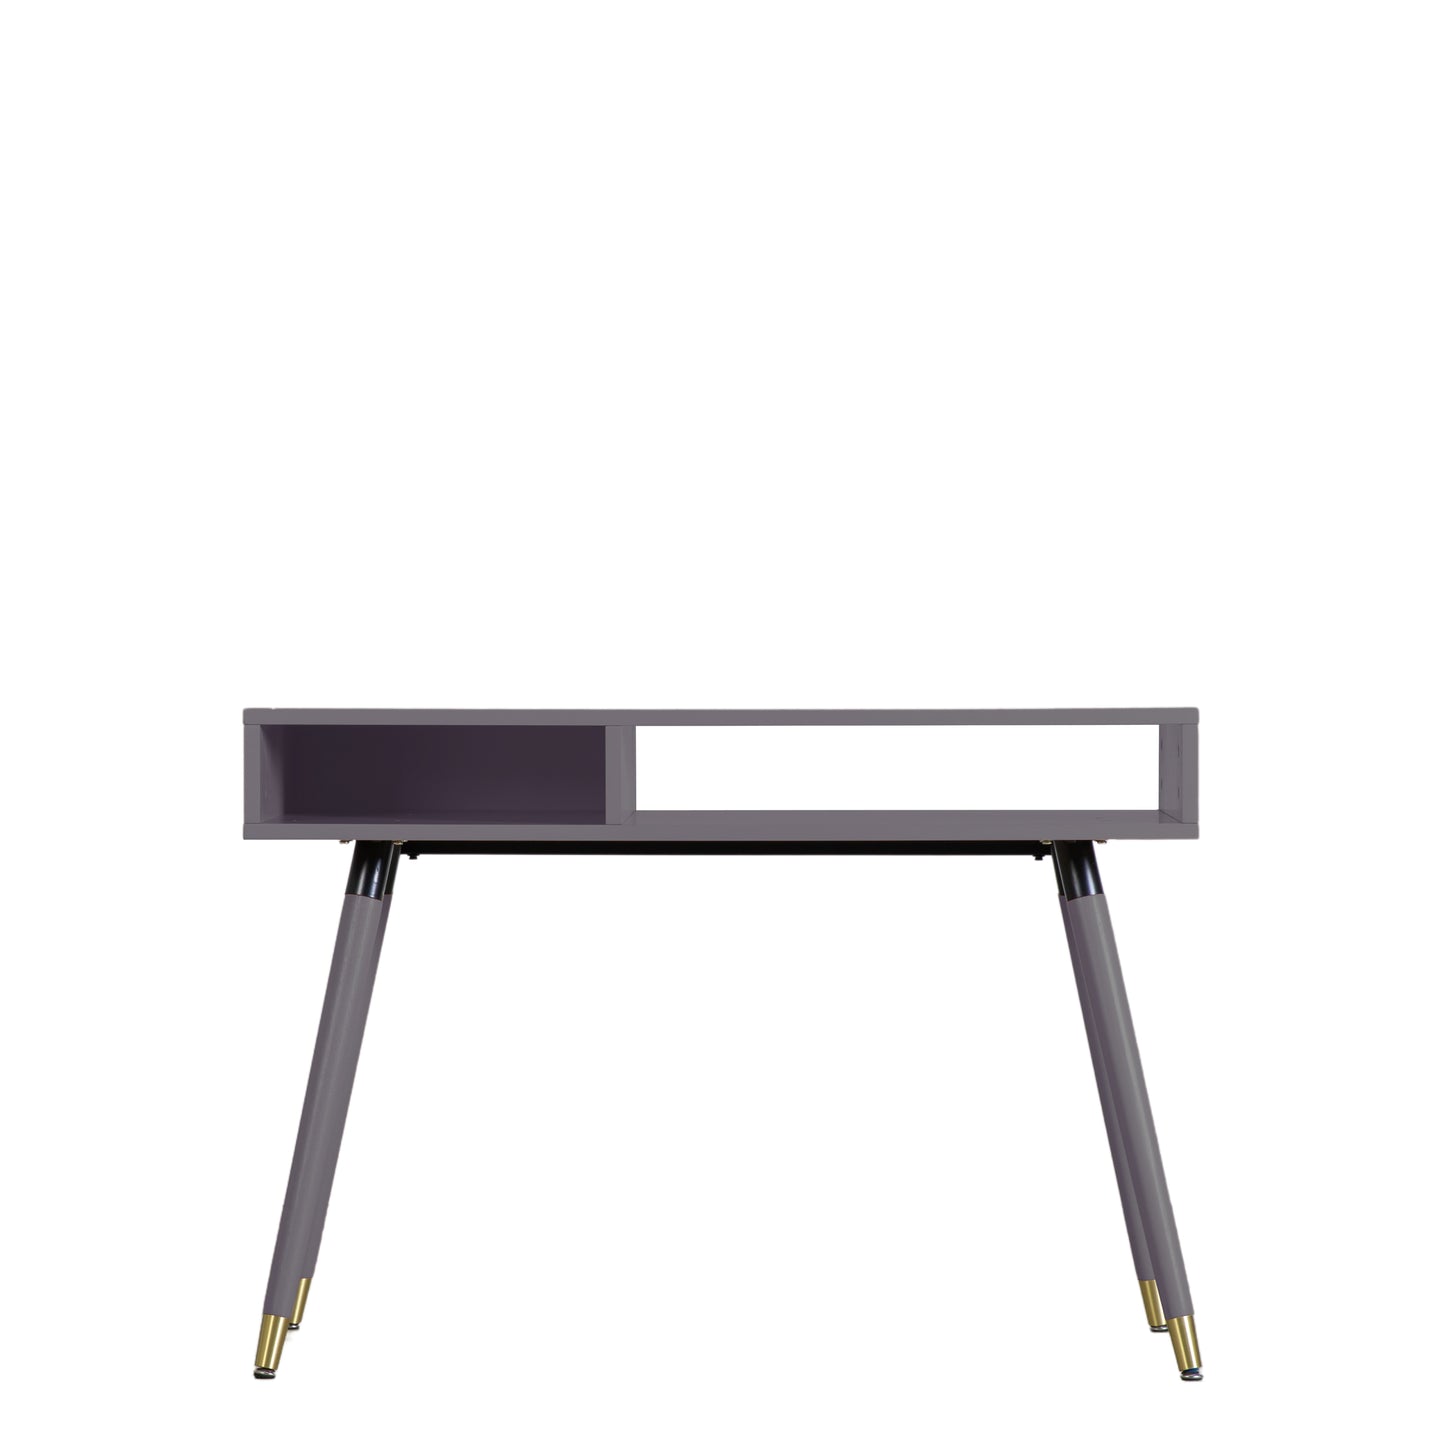 A Thurlestone Console Table Grey with gold legs and a drawer perfect for home furniture and interior decor.